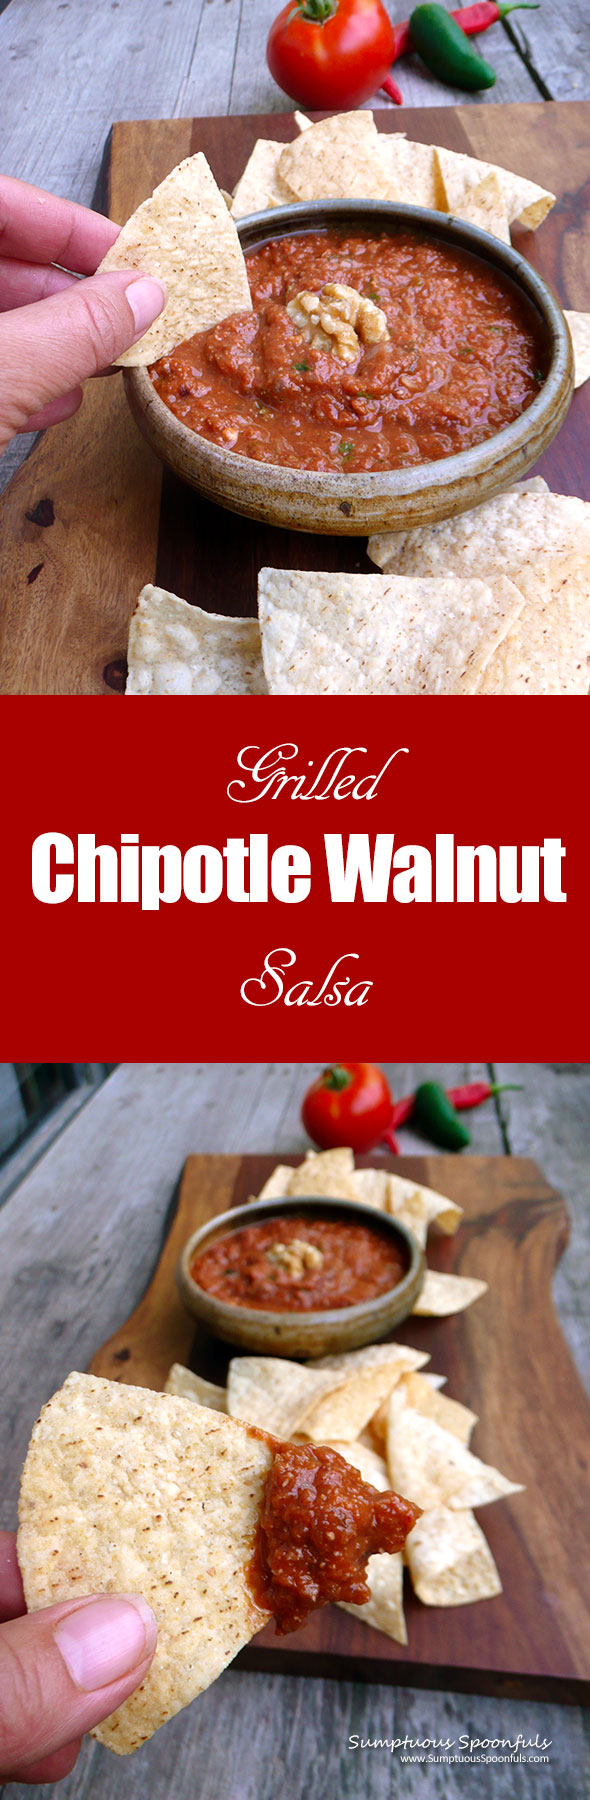 Grilled Chipotle Walnut Salsa ~ Sumptuous Spoonfuls #spicy #smoky #salsa #recipe